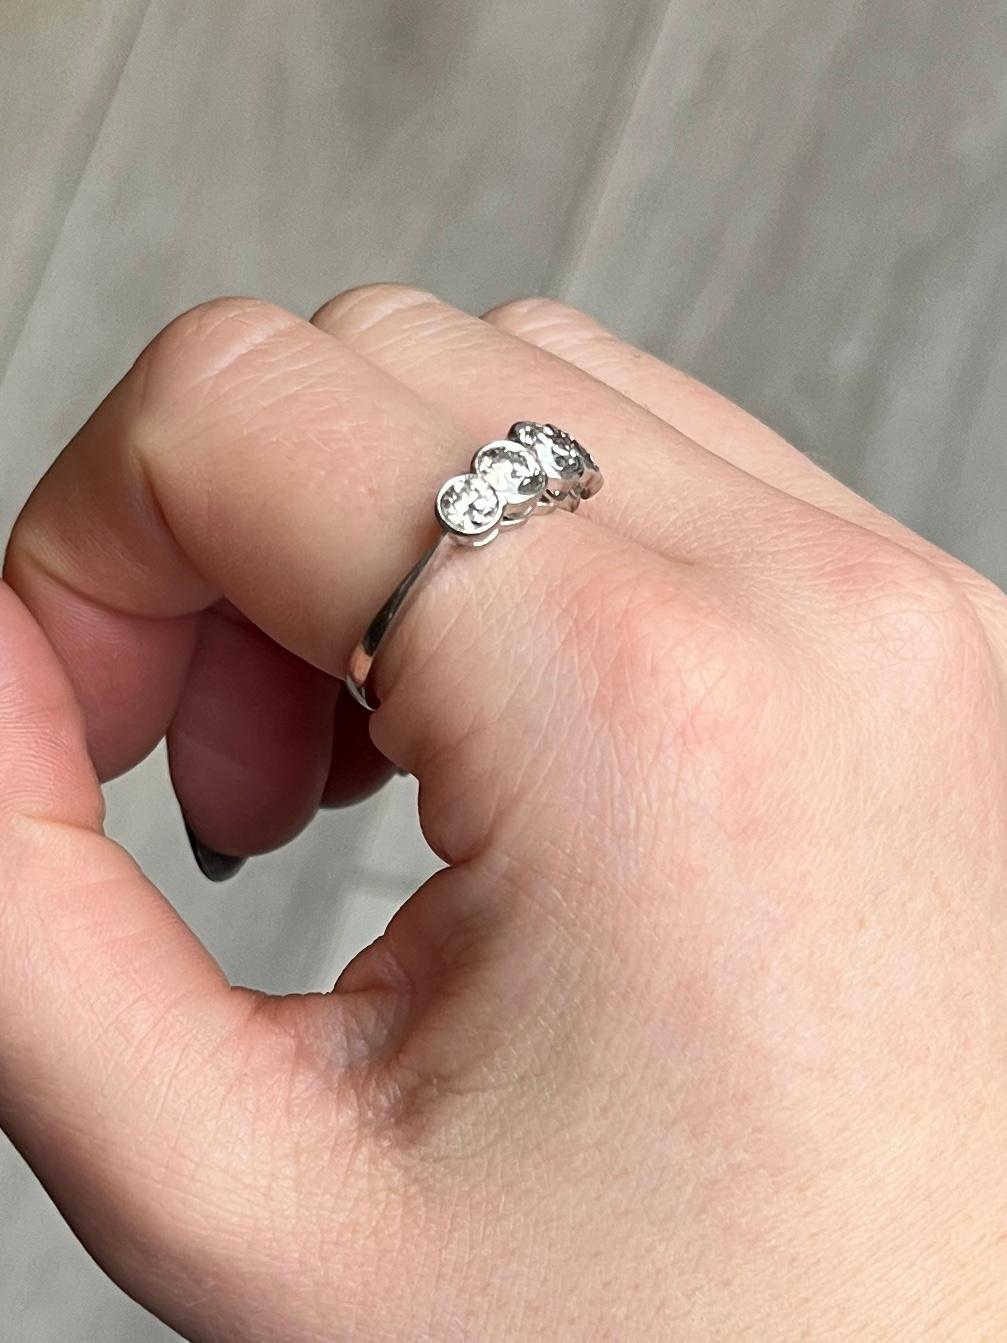 Five glistening diamonds sit fabulously encased in simple platinum settings. The diamond total is 1.5pts. 

Ring Size: Q or 8 
Height Off Finger: 5

Weight: 3.9g